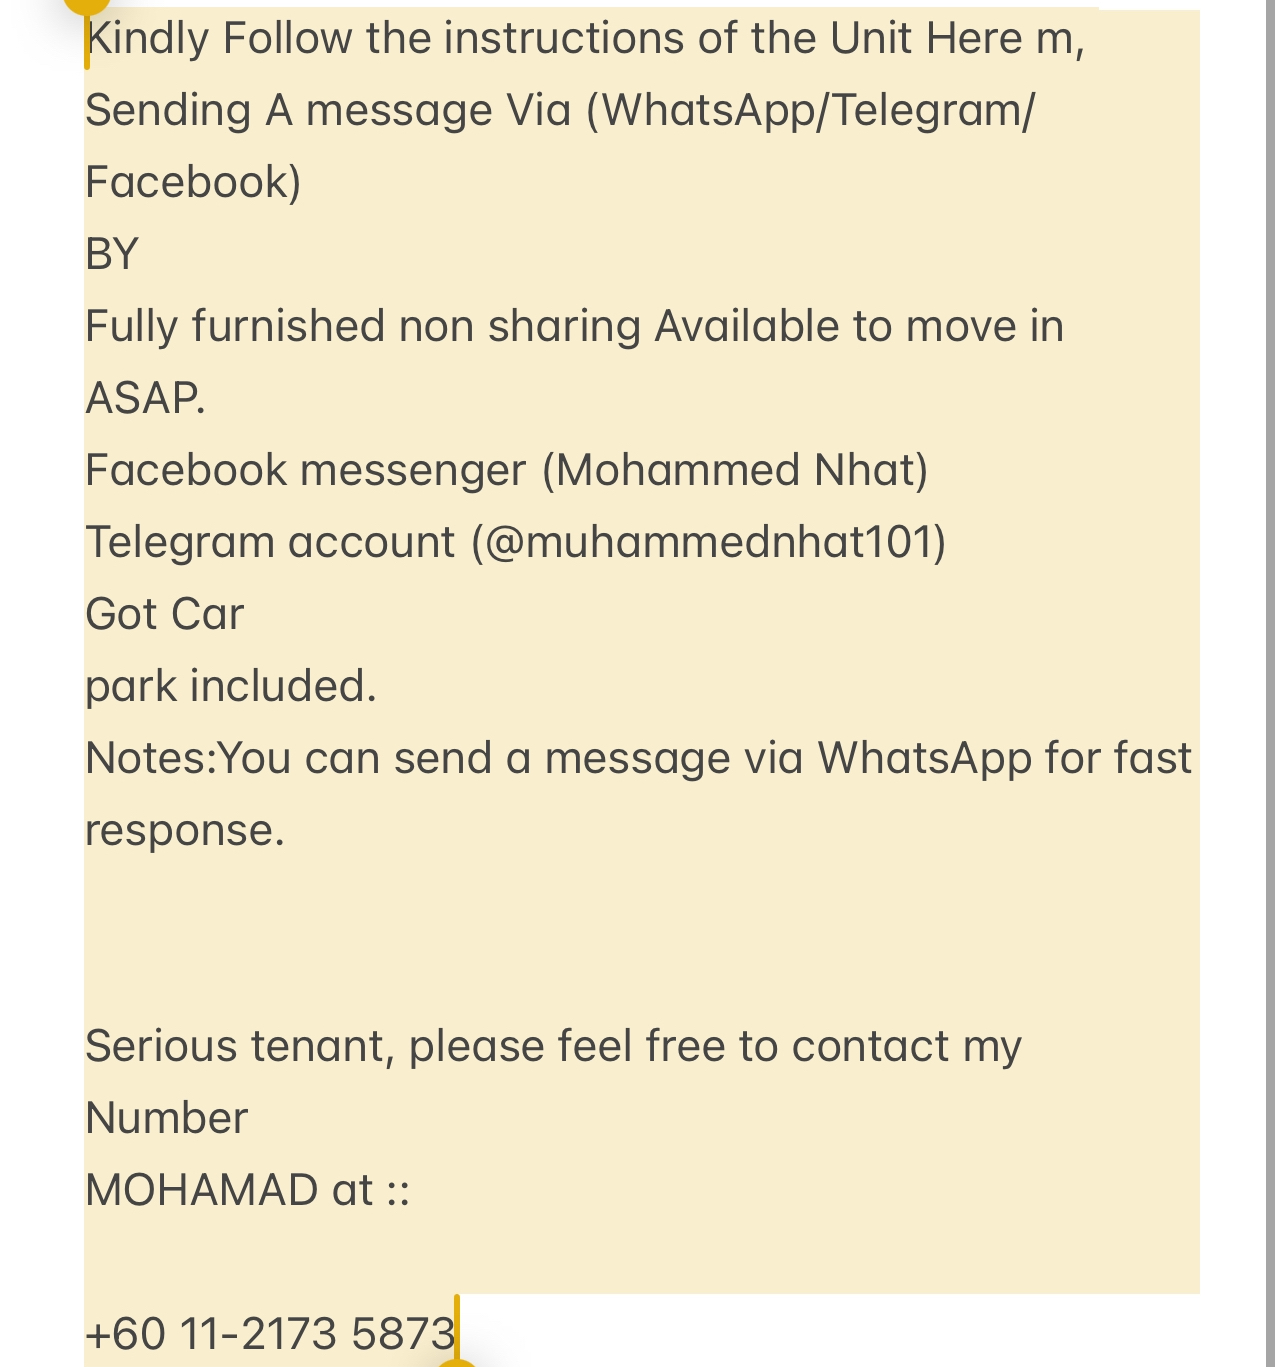 room for rent, master room, jalan tyng, Send the owner a message on WhatsApp/facebook if you want to RENT the unit facebook (Mohammed Nhat)&Telegram(@muhammednhat101) Fully furnished non sharing :(comfortable)